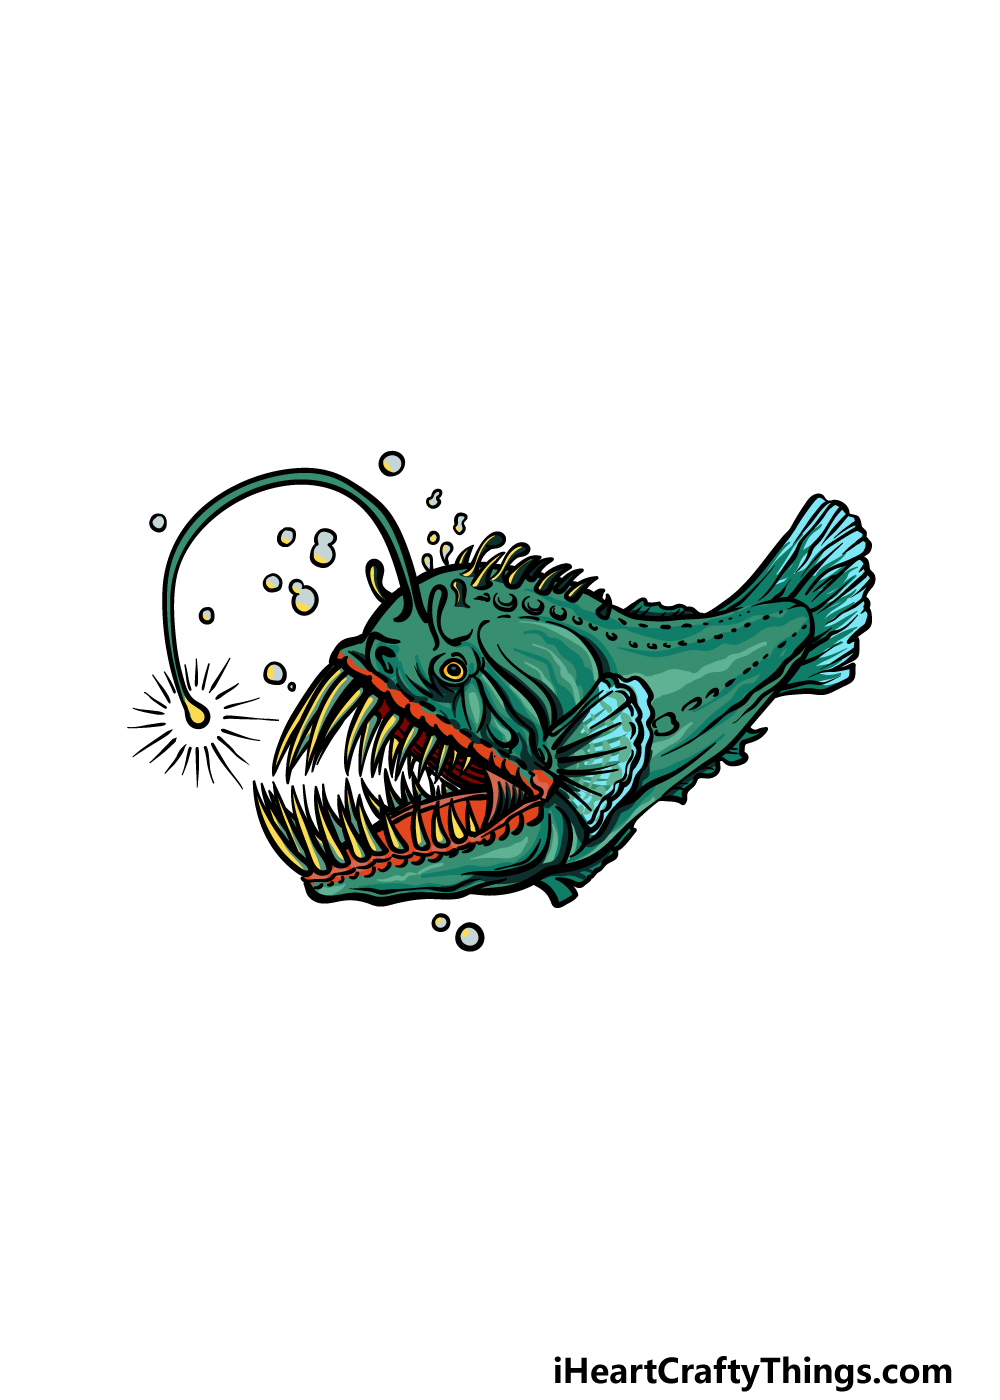 Angler Fish Drawing - How To Draw An Angler Fish Step By Step